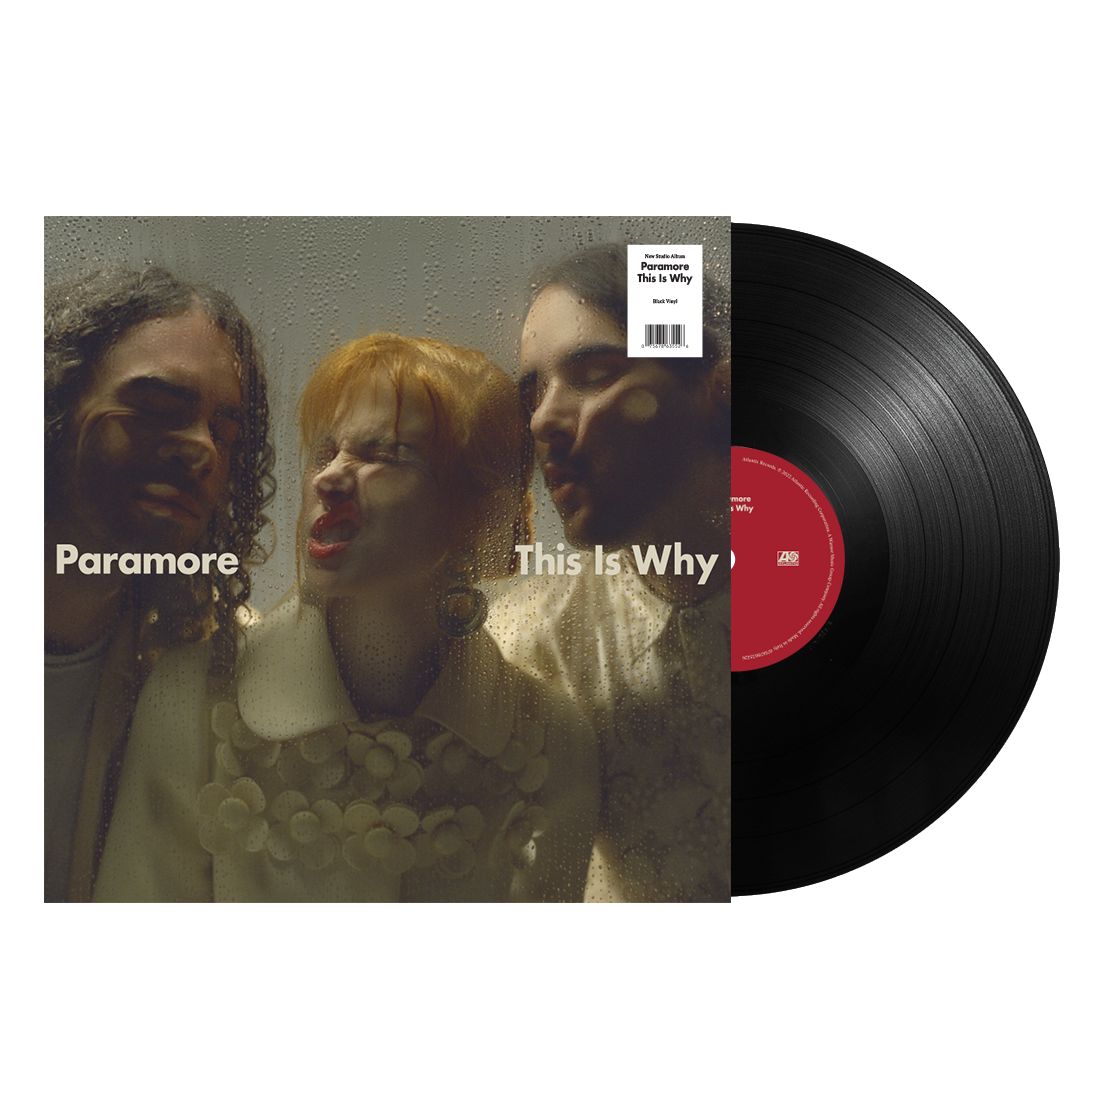 Paramore - This is Why: Vinyl LP